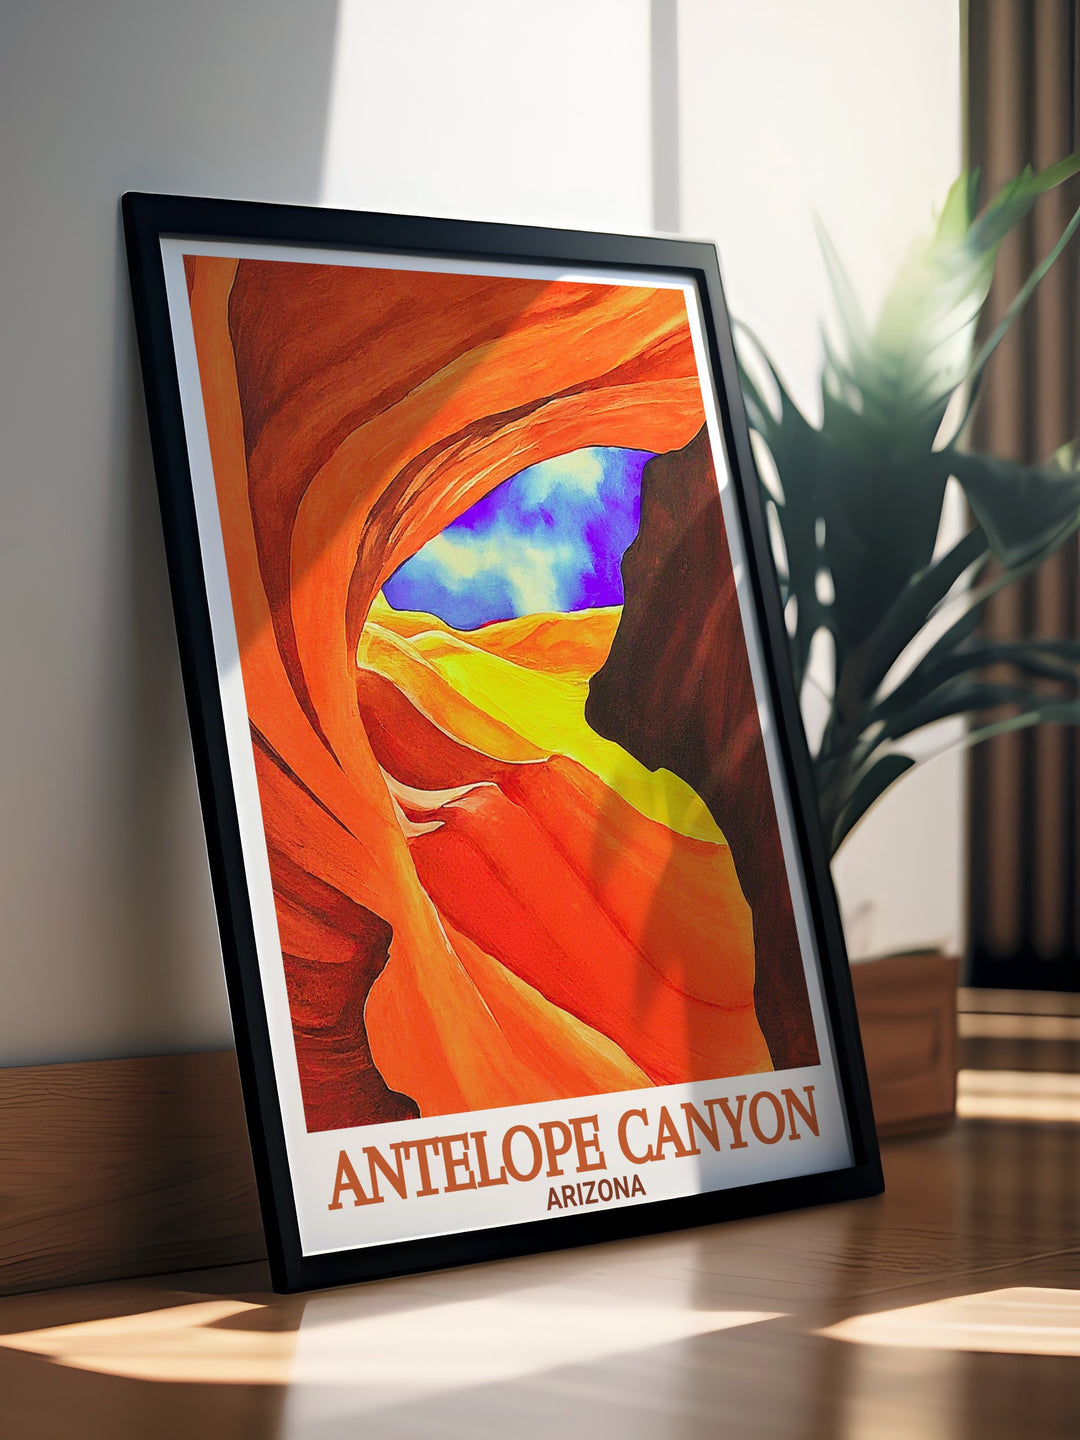 Antelope Canyon modern art print that brings the awe inspiring beauty of this Arizona natural wonder into your living space perfect for creating a calming and visually striking atmosphere.